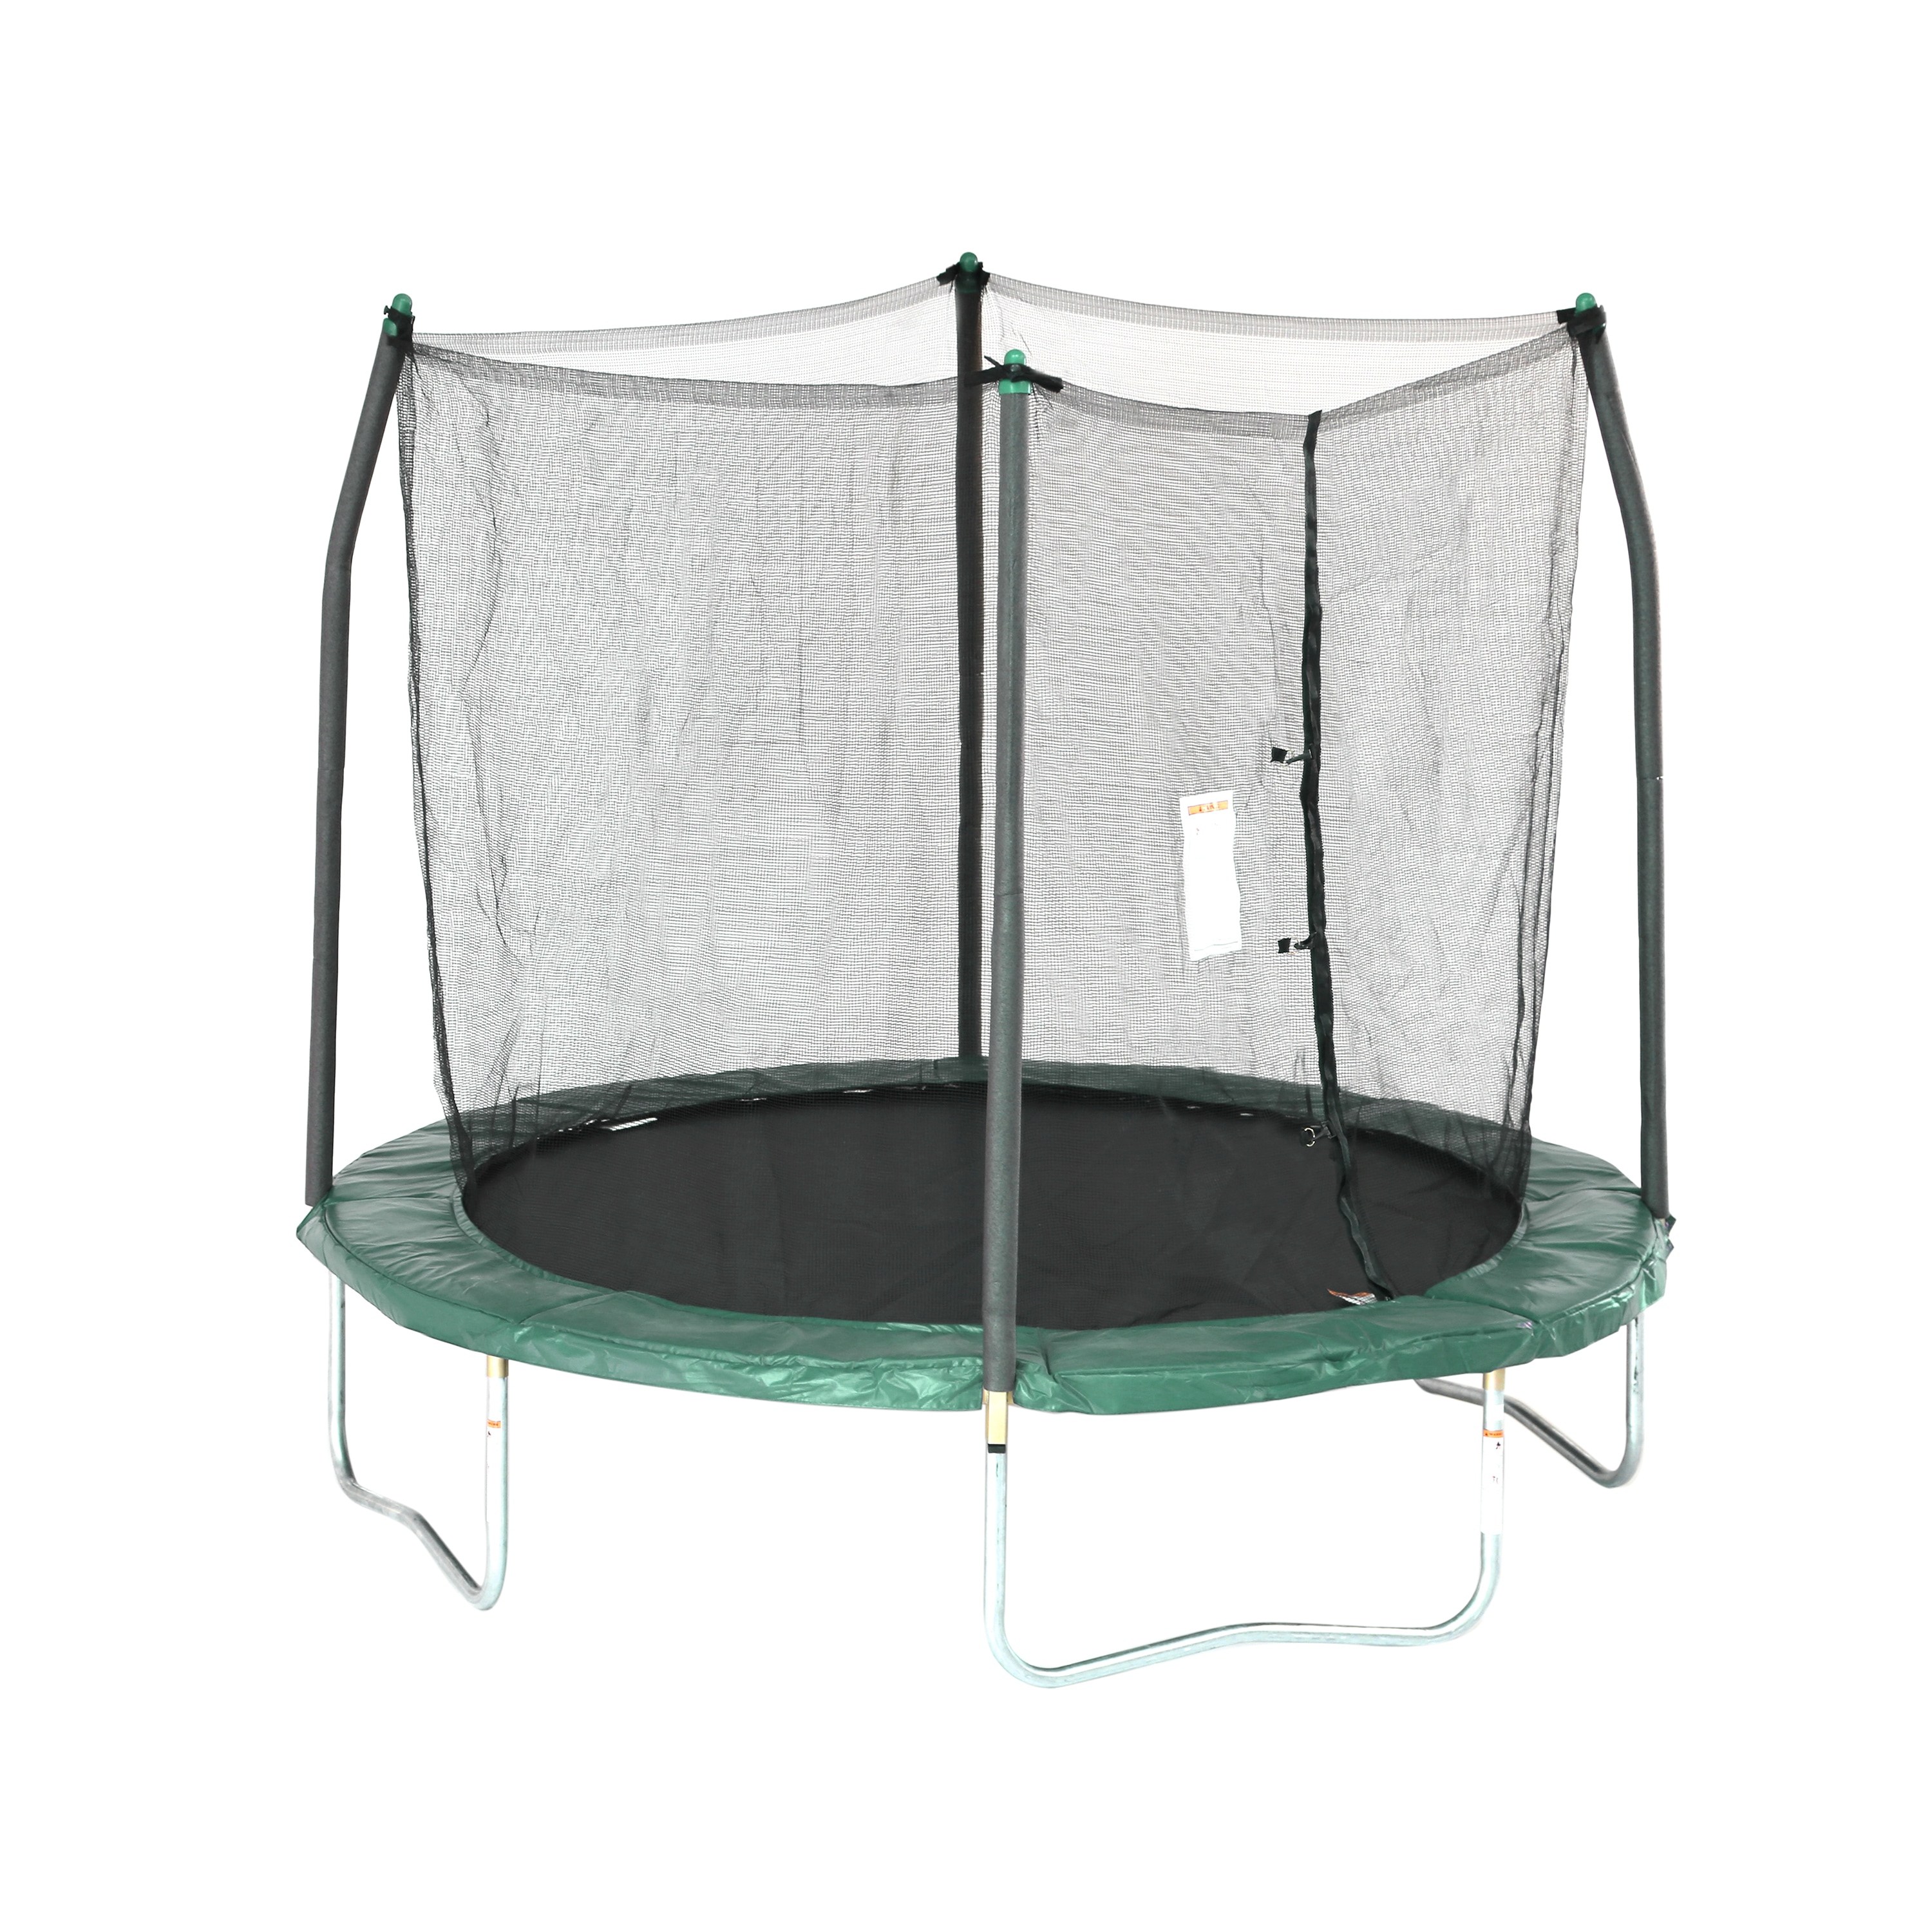 8 Ft. Round Trampoline with Enclosure - Green Spring Pad - Outdoor Backyard Recreational Trampoline for Ages 6 and Up | - Skywalker SWTC811